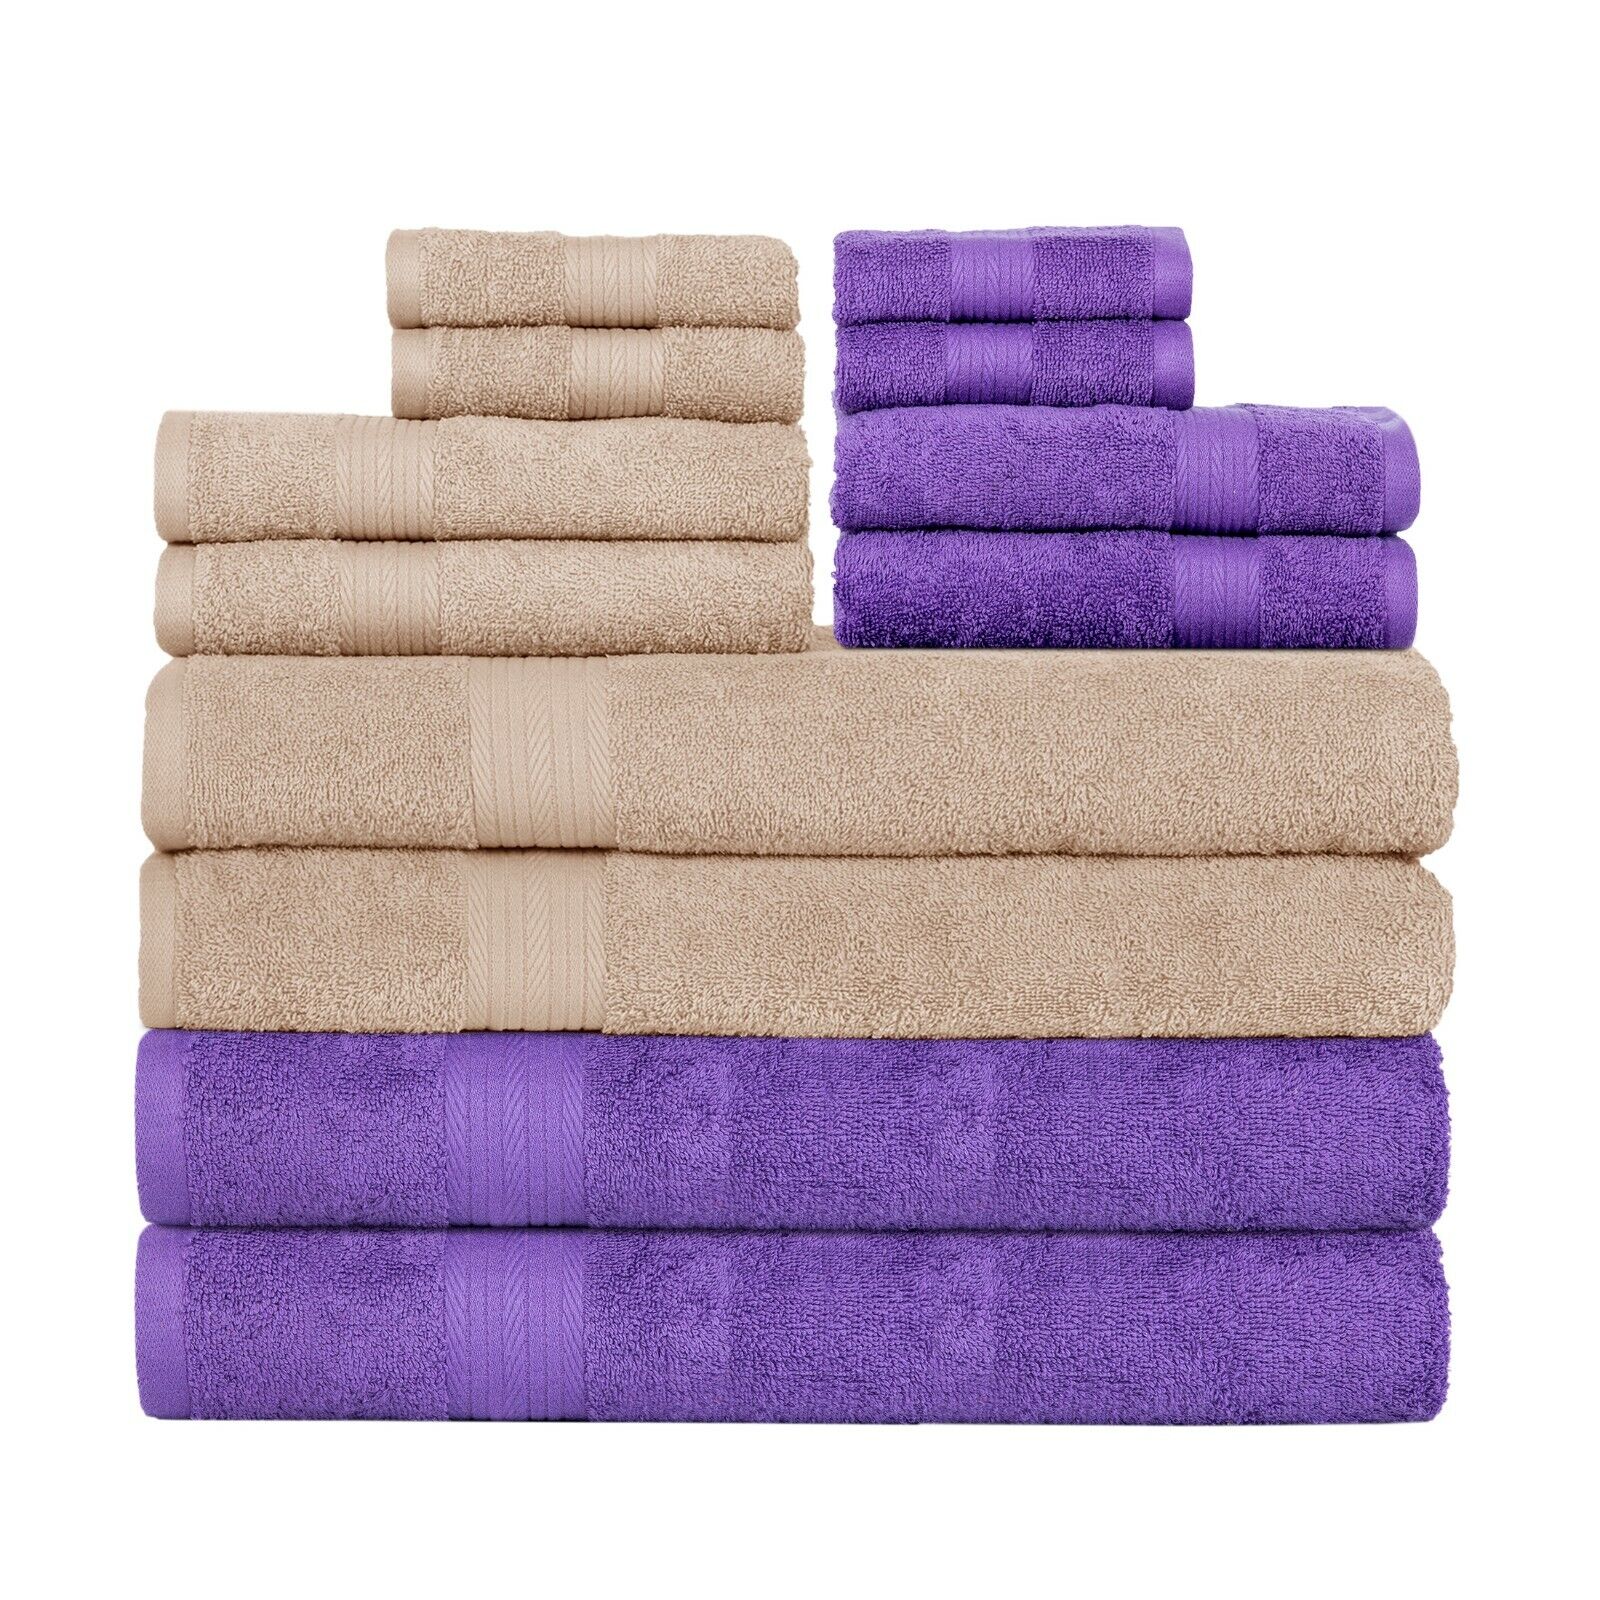 Ample Decor Bathroom Towel Set of 12 Assorted Colors Ultra Absorbent 100% Cotton